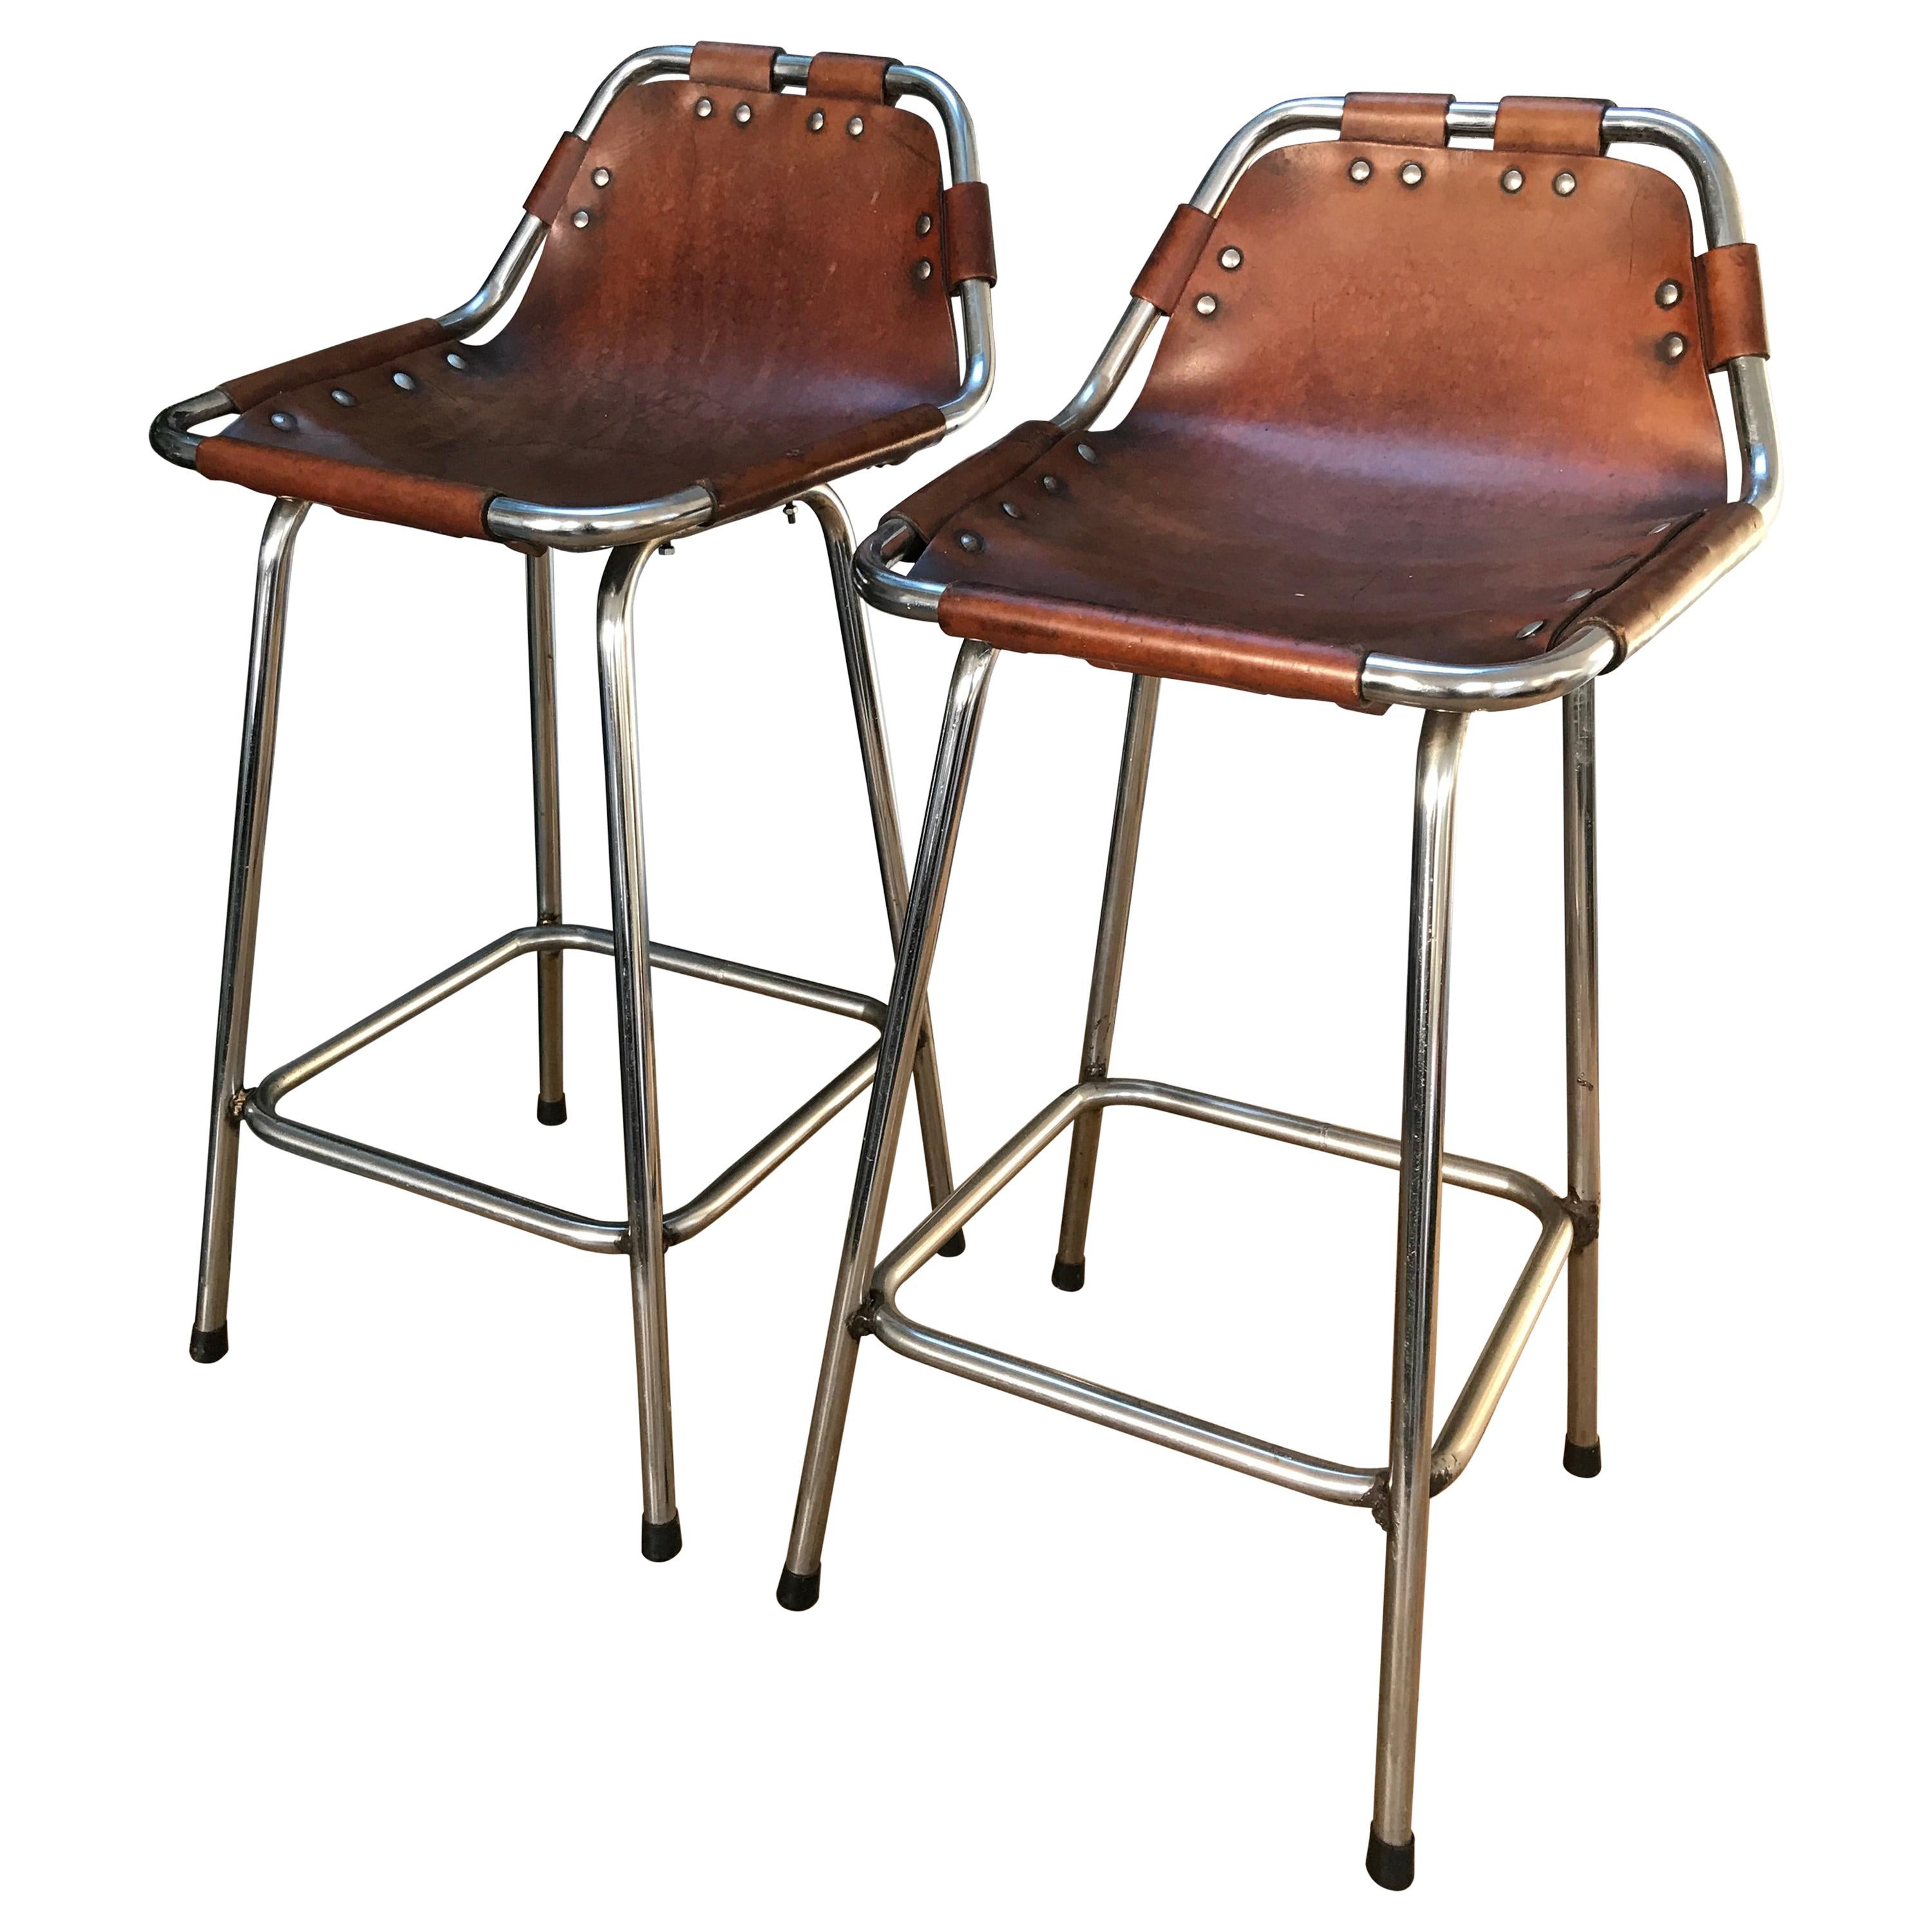 Two High Bar Stools Selected by Charlotte Perriand for the Les Arcs Ski Resort